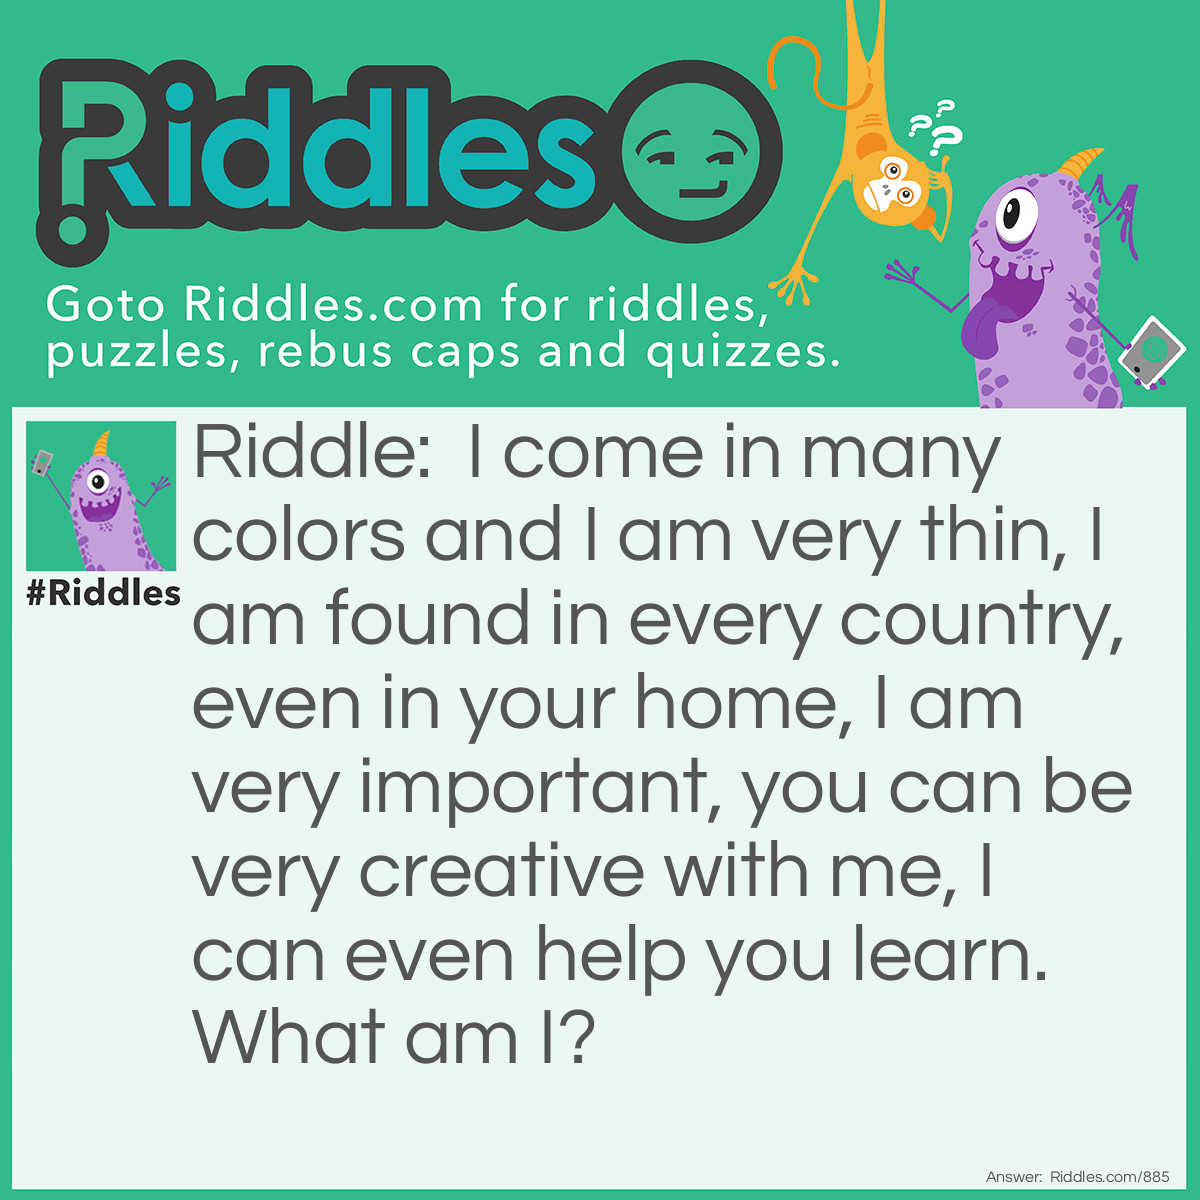 Riddle: I come in many colors and I am very thin, I am found in every country, even in your home, I am very important, you can be very creative with me, I can even help you learn.
What am I? Answer: Paper!